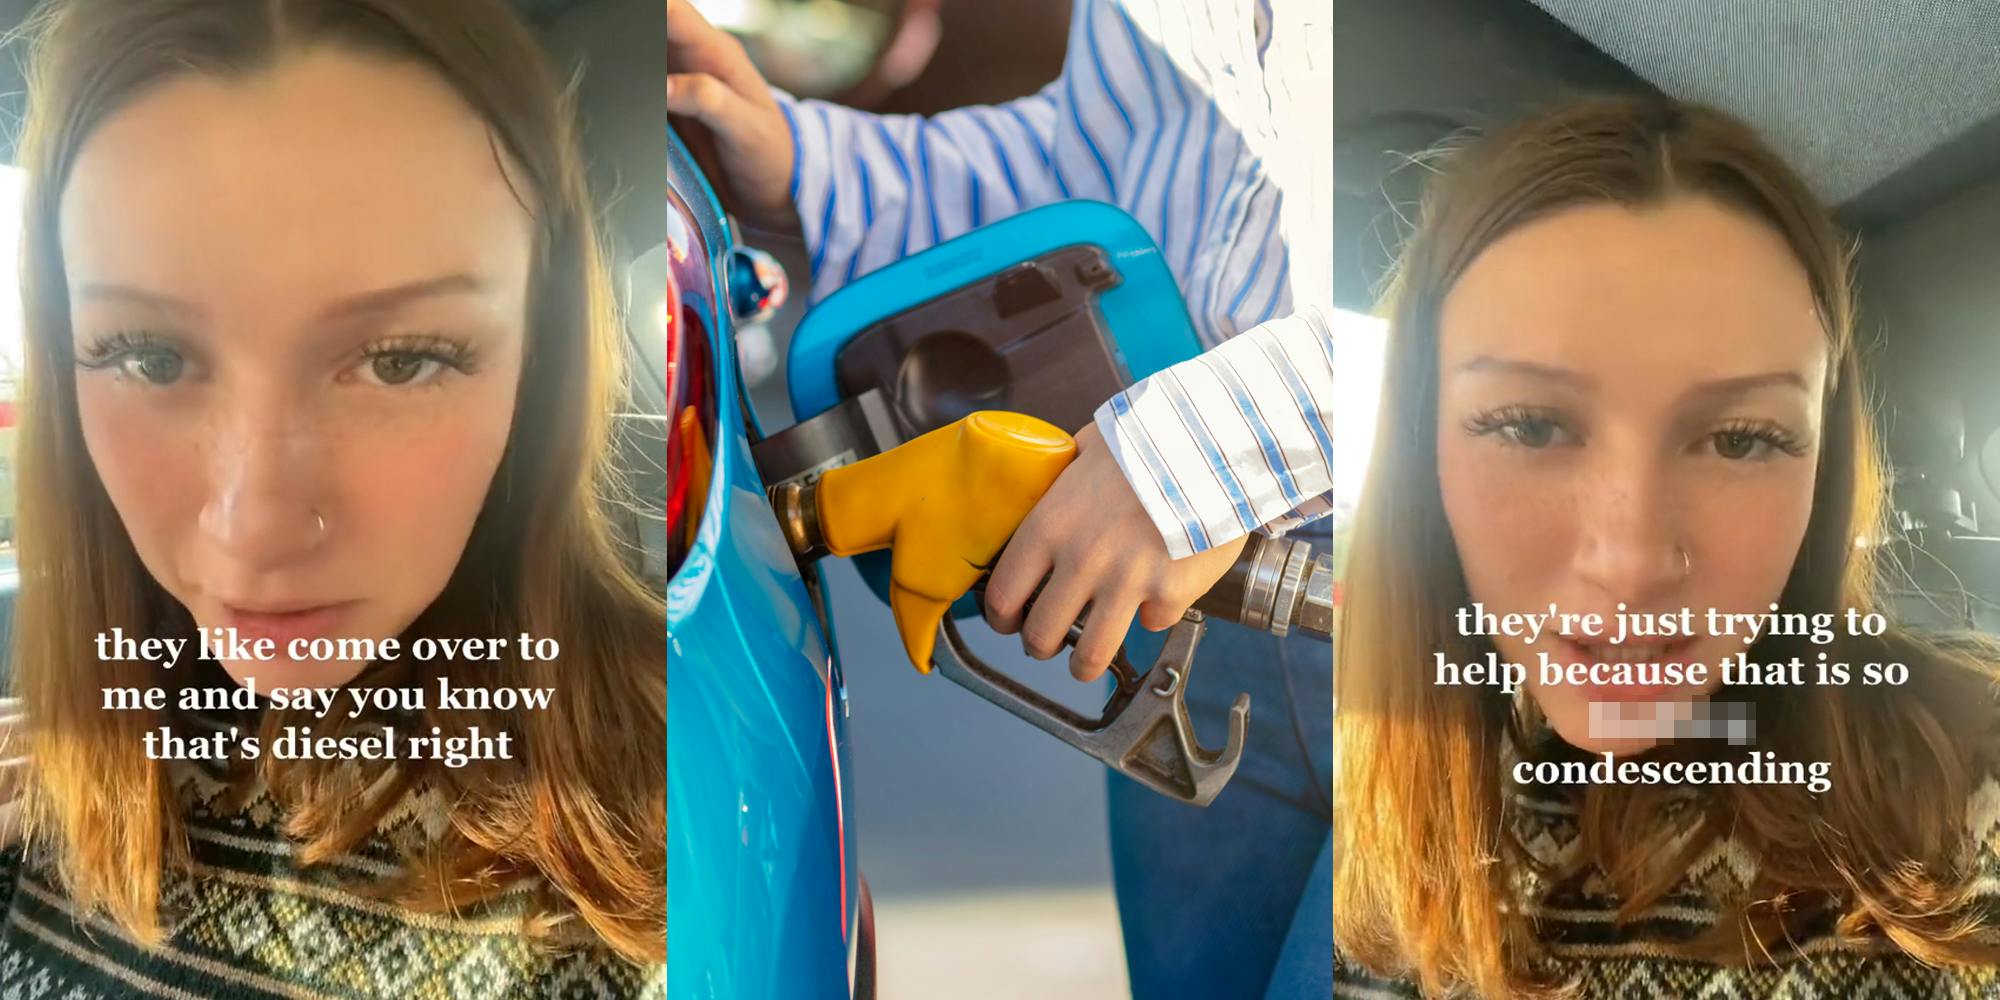 person speaking in car with caption "they like come over to me and say you know that's diesel right" (l) person pumping gas into blue car (c) person speaking in car with caption "they're just trying to help because that is so blank condescending" (r)